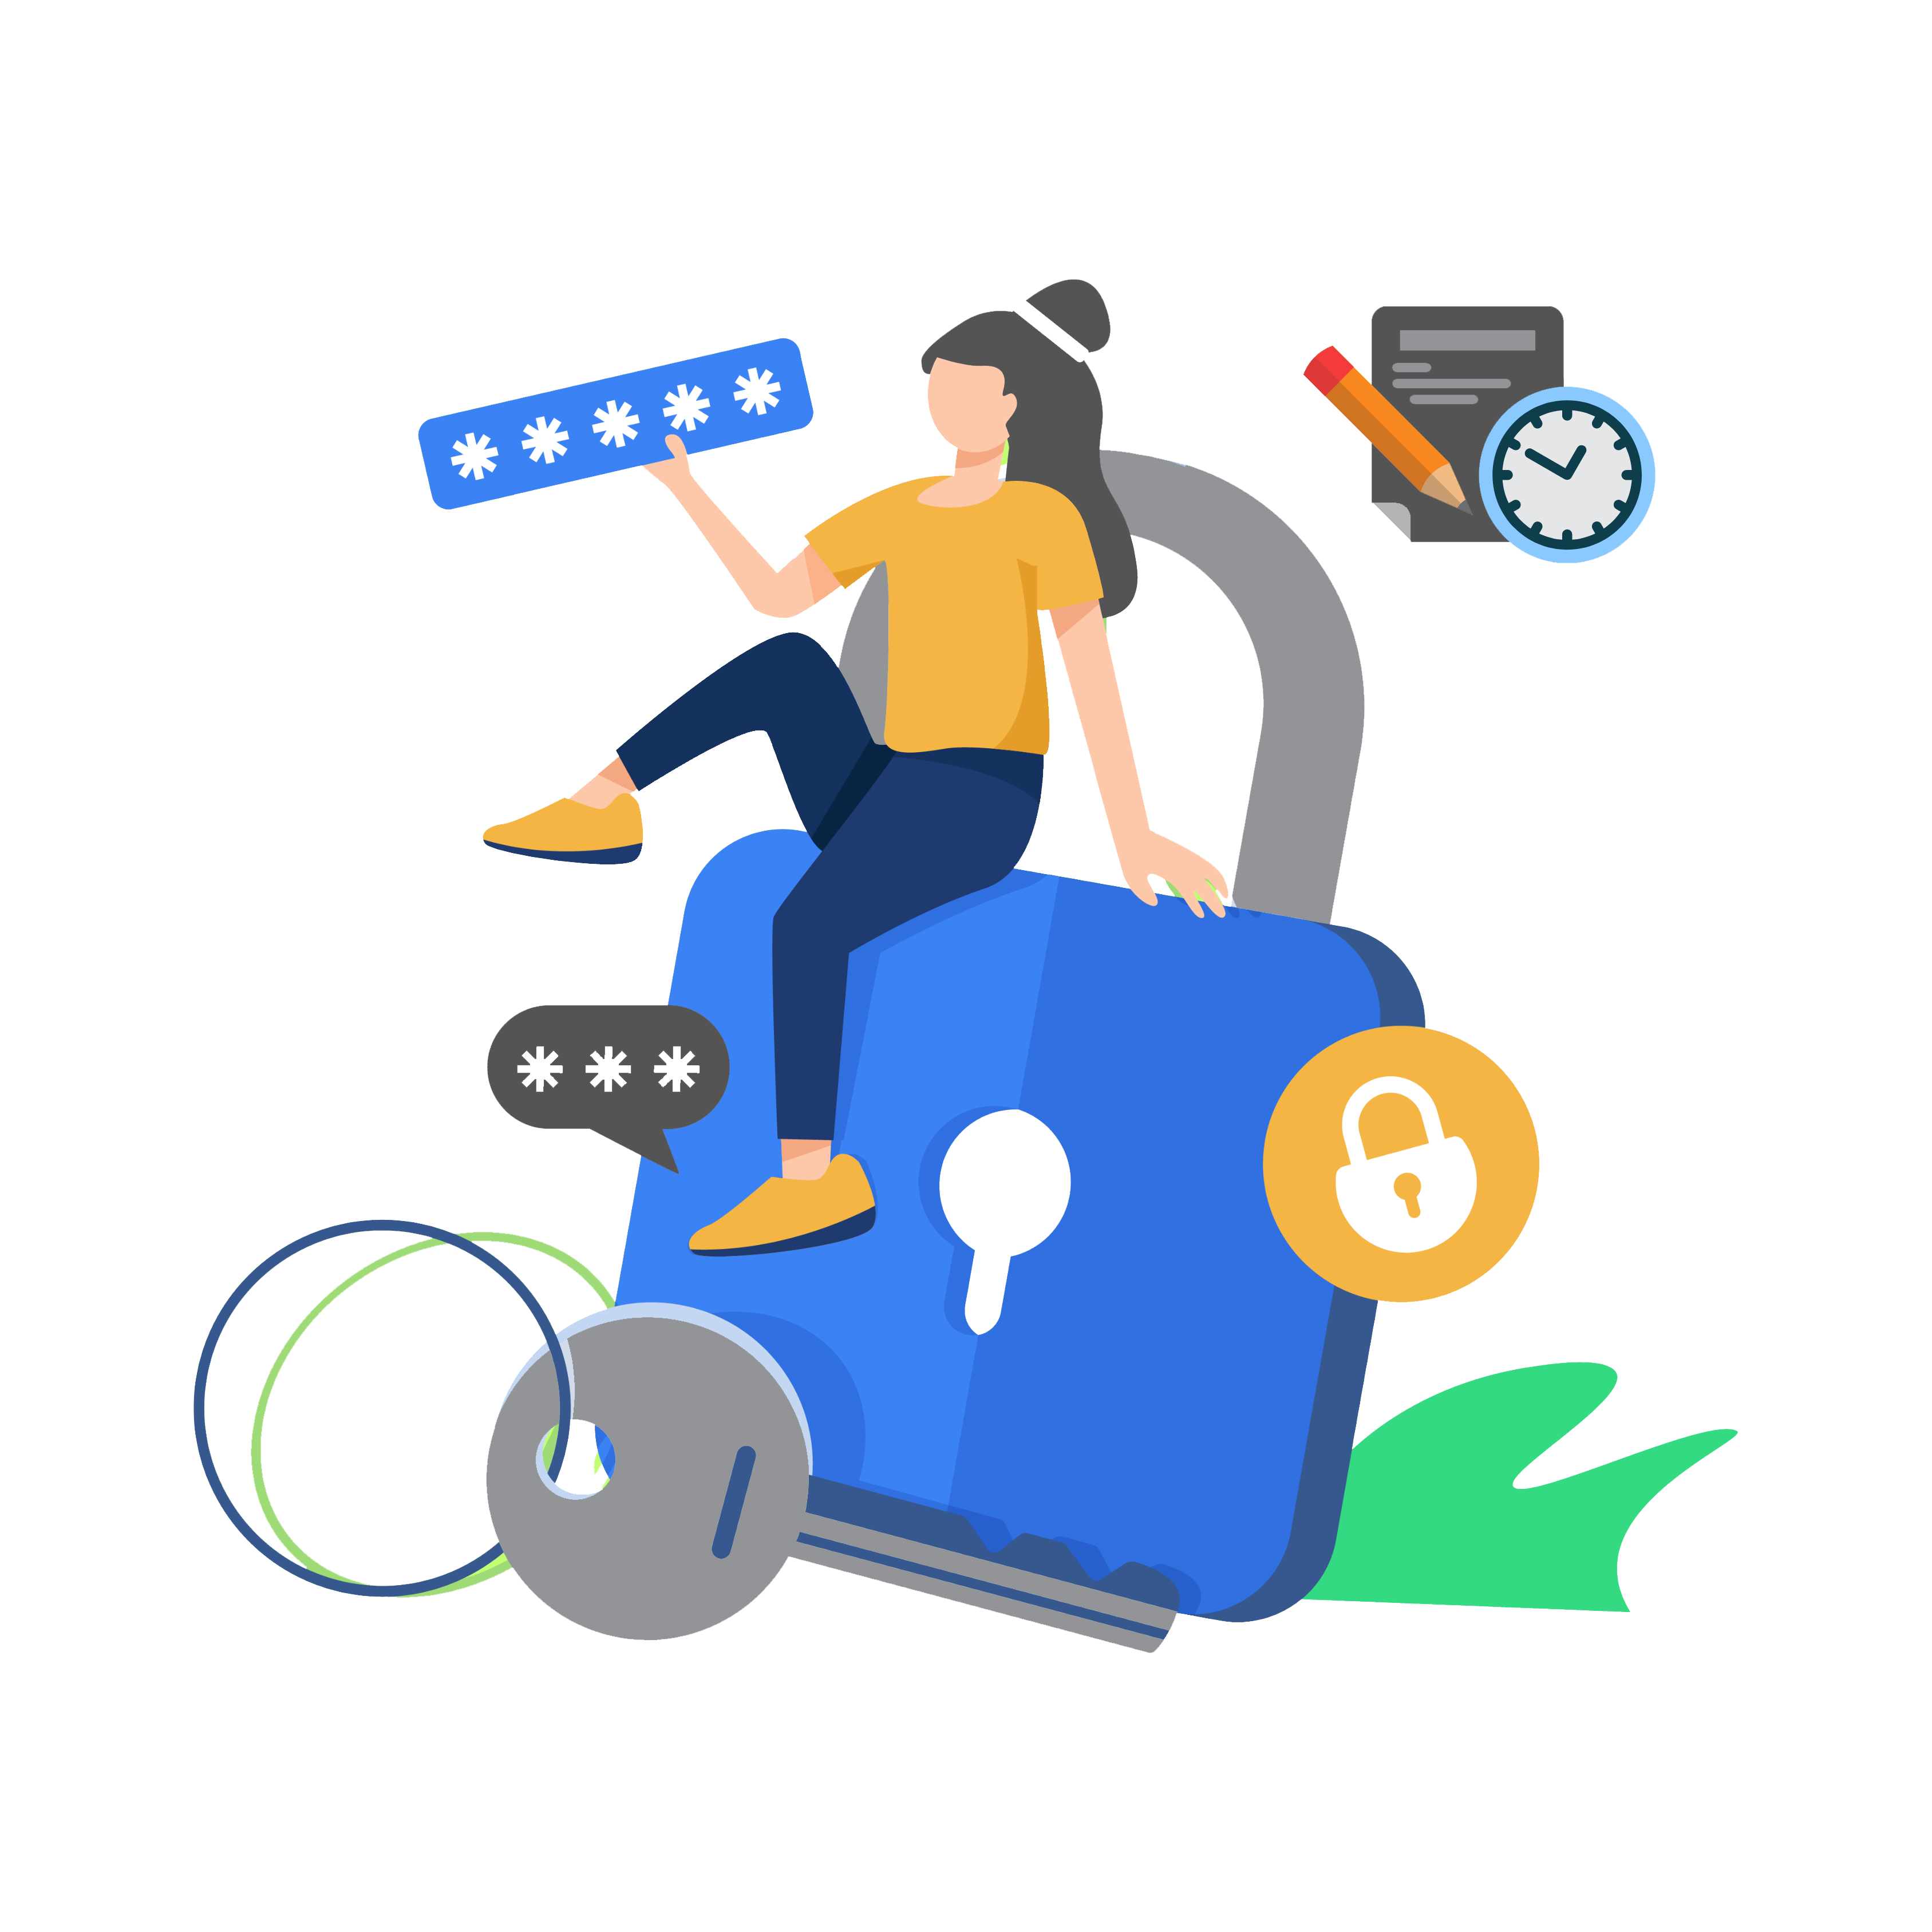 A graphic illustration of a person seated on a large blue padlock, holding a digital key, representing Tally on Cloud security and encrypted data access.